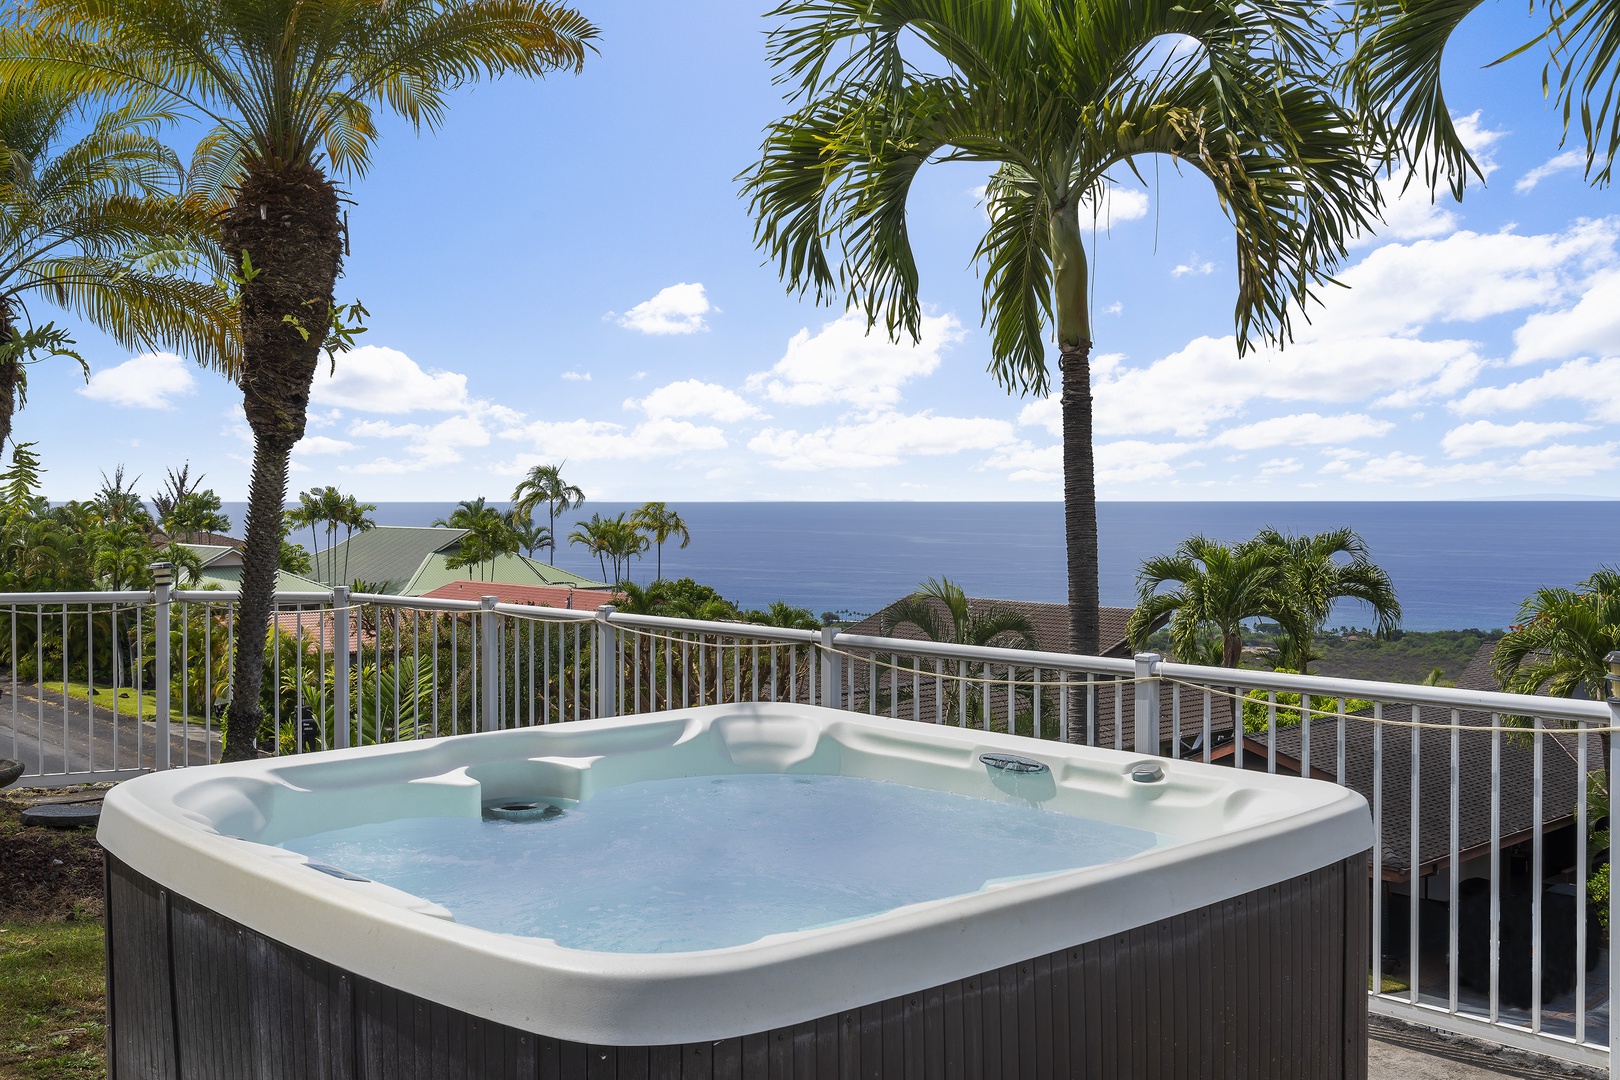 Kailua-Kona Vacation Rentals, Honu Hale - Above ground hot tub for your relaxing enjoyment